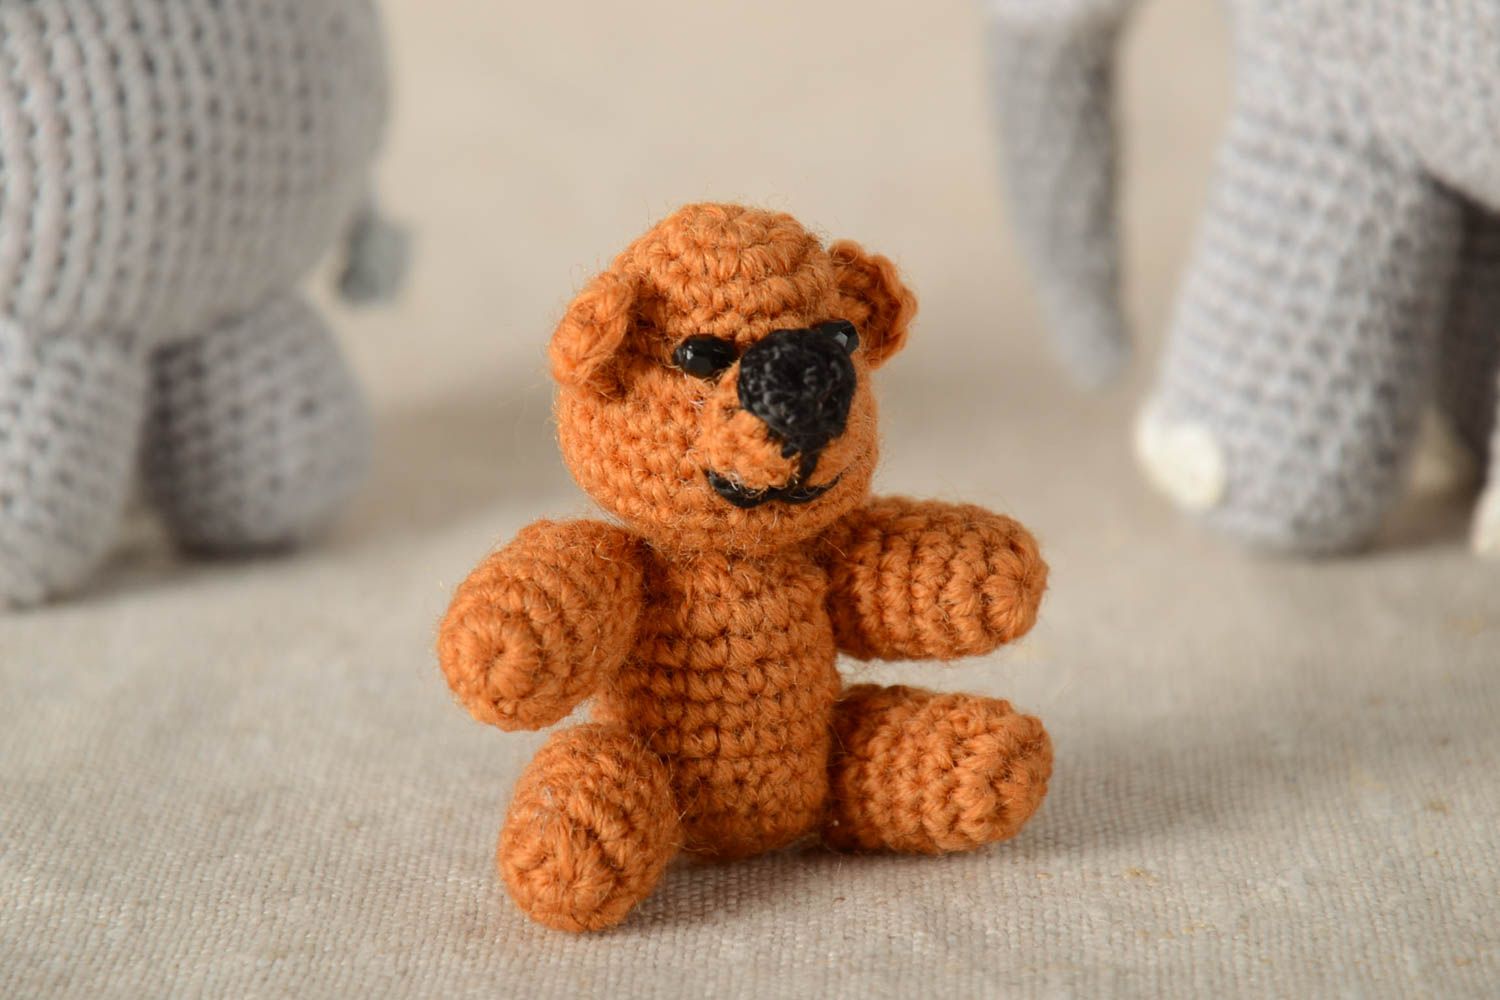 Cute crocheted toy stylish designer textile toy handmade present for kids photo 1